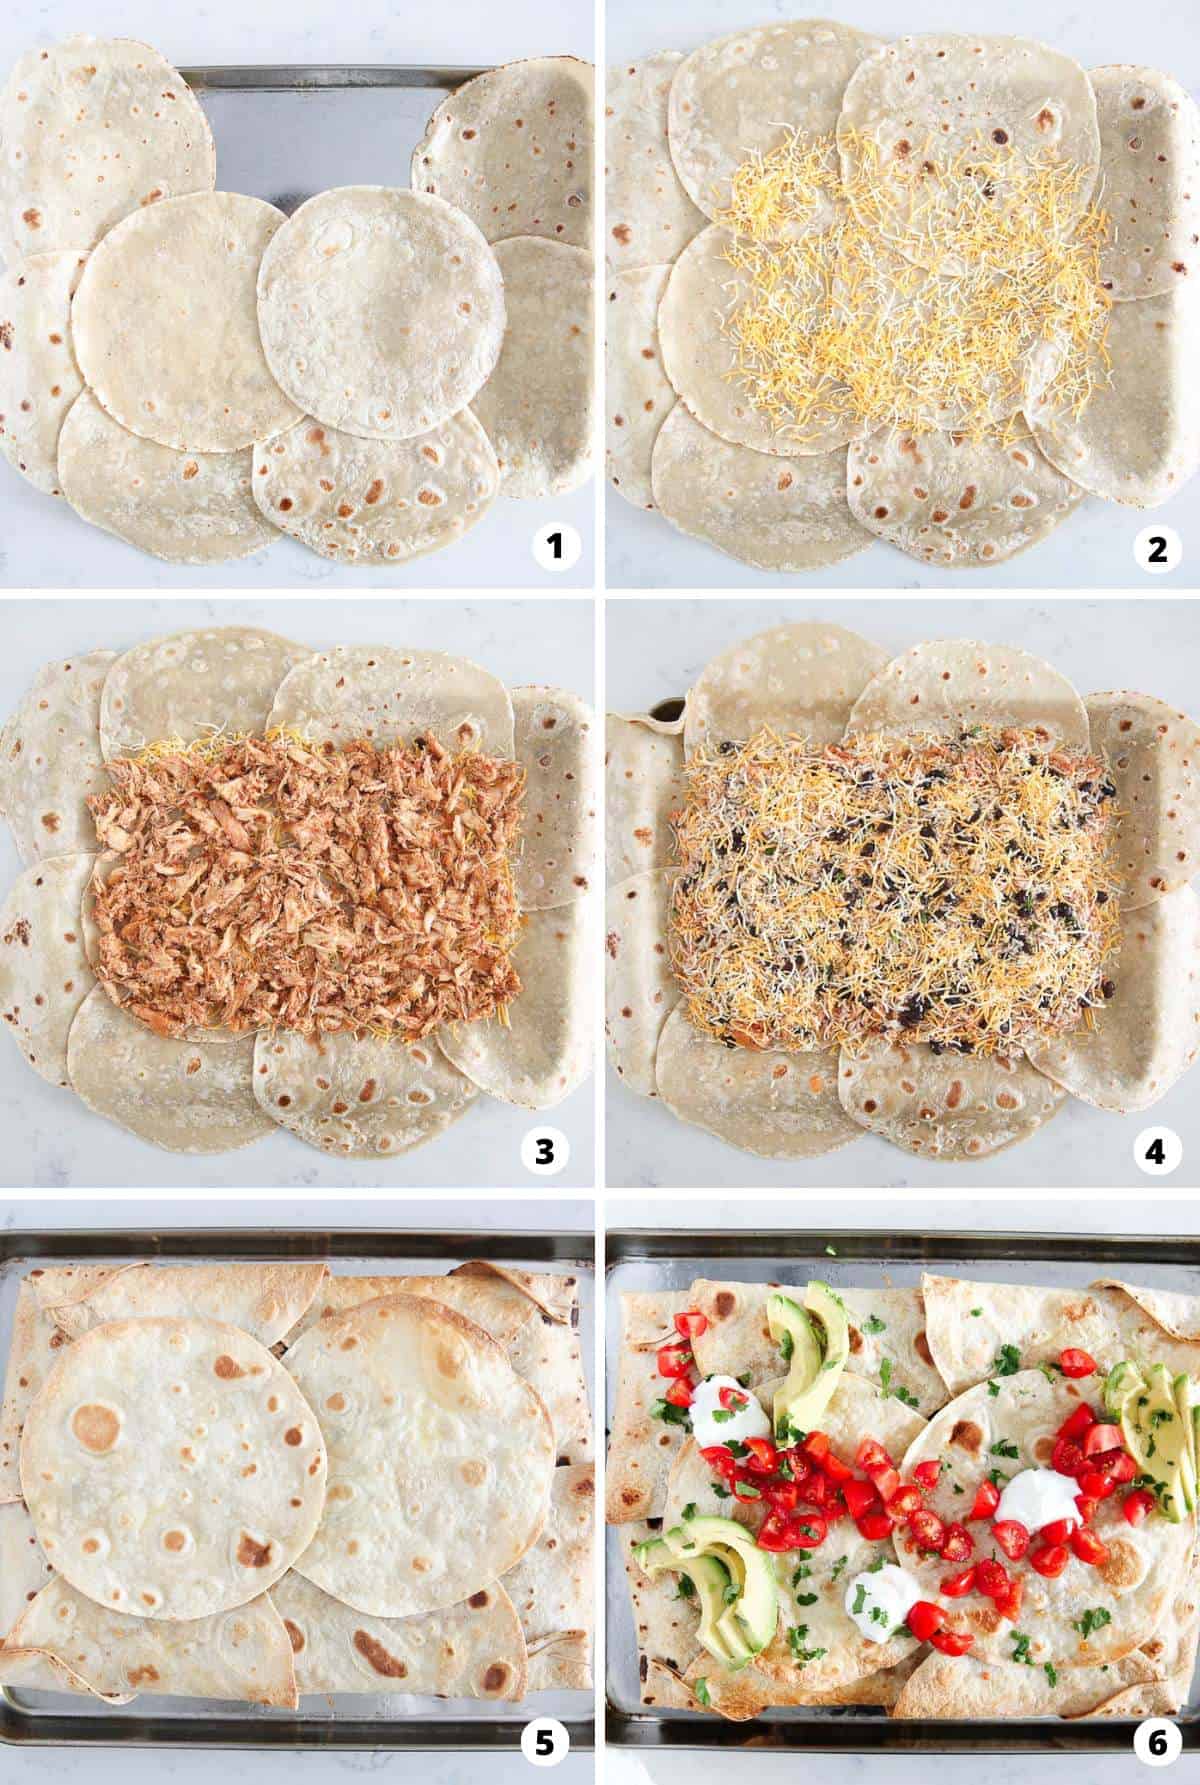 Showing how to make sheet pan quesadillas in a 6 step collage.